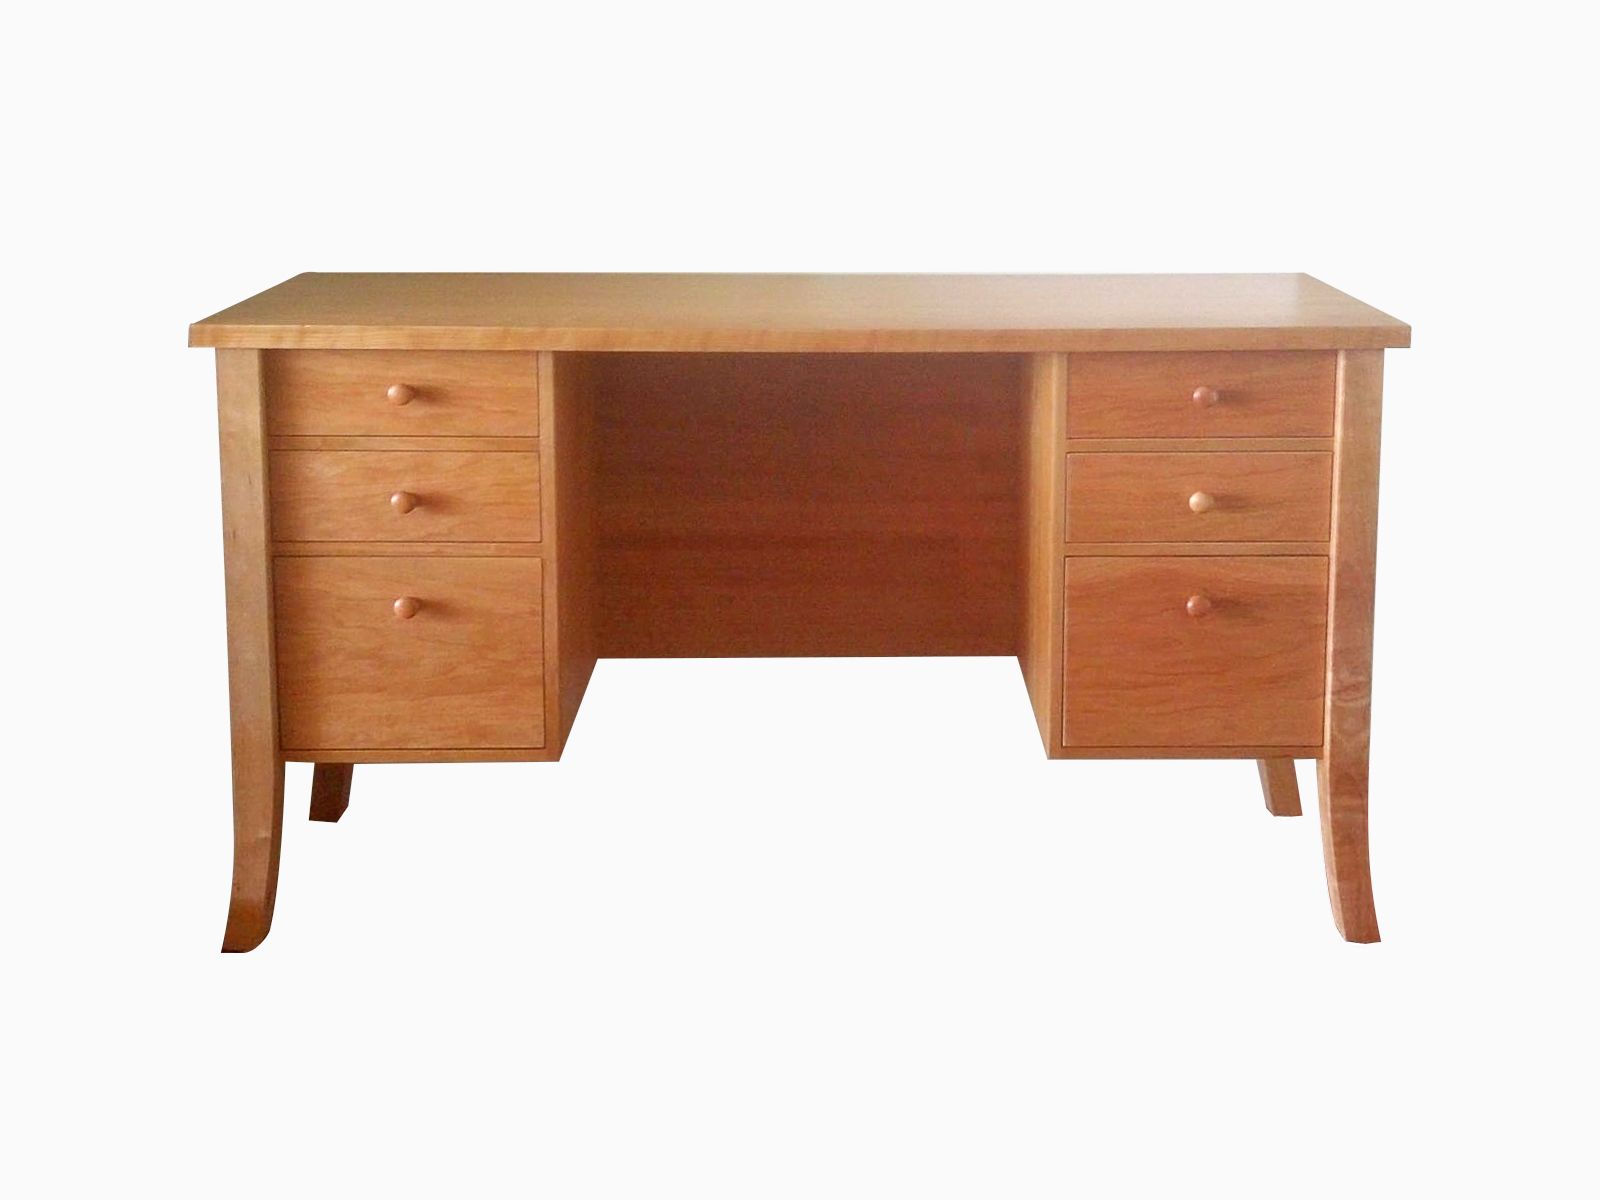 Buy Hand Crafted Solid Cherry Pedestal Desk With Drawers Made To